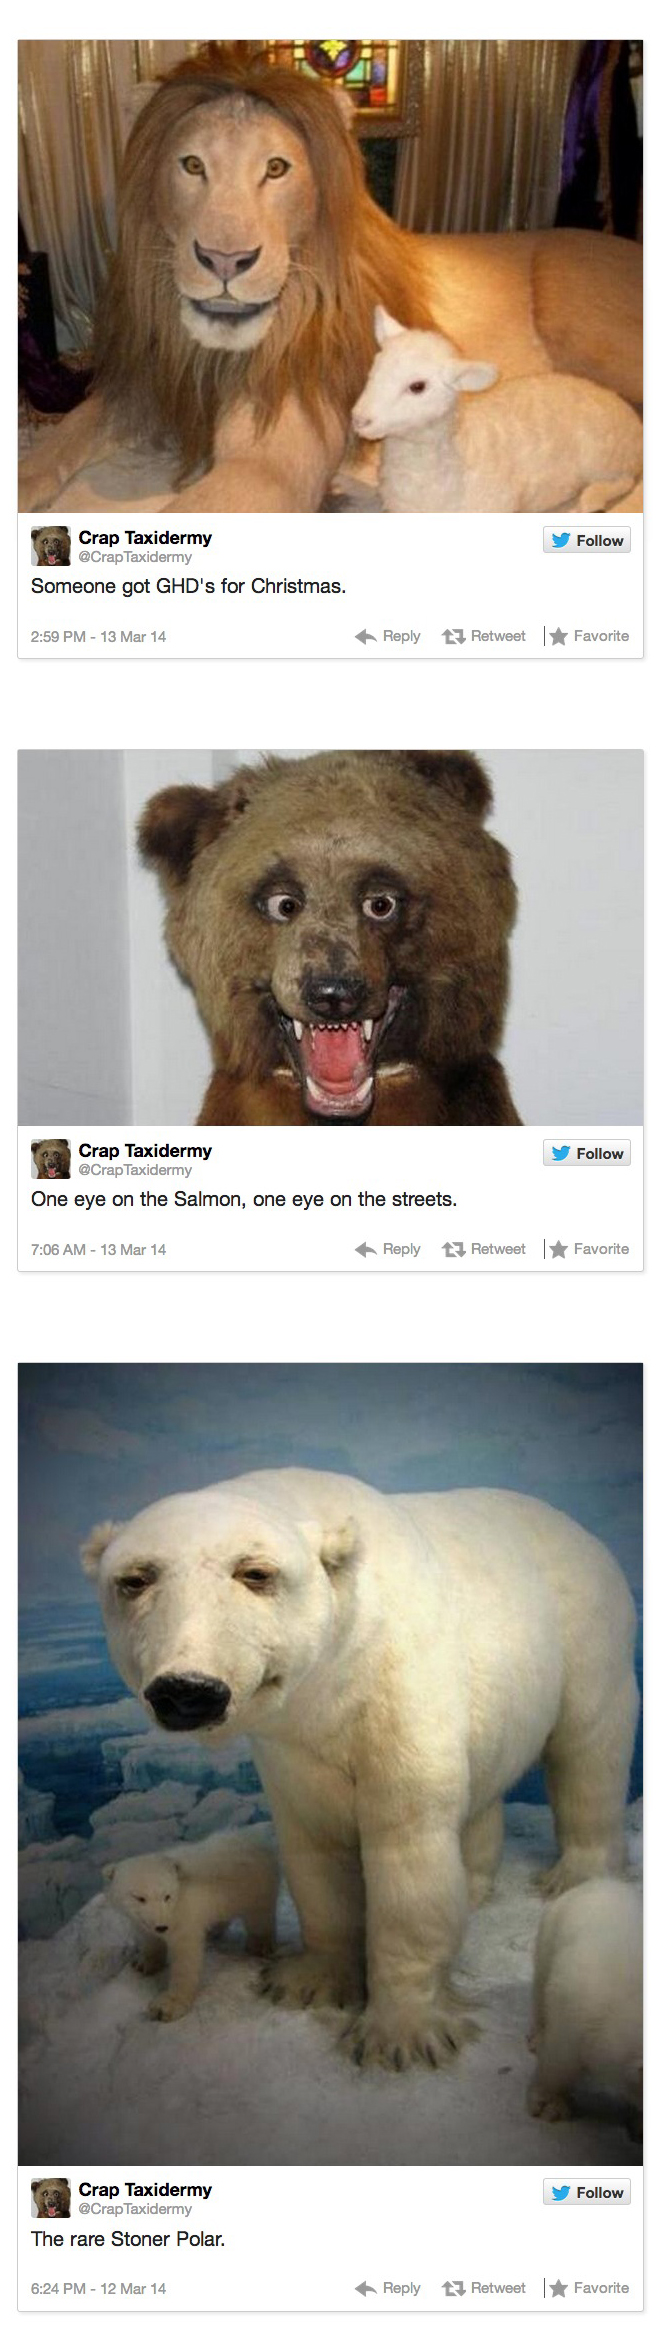 combined-crap-taxidermy